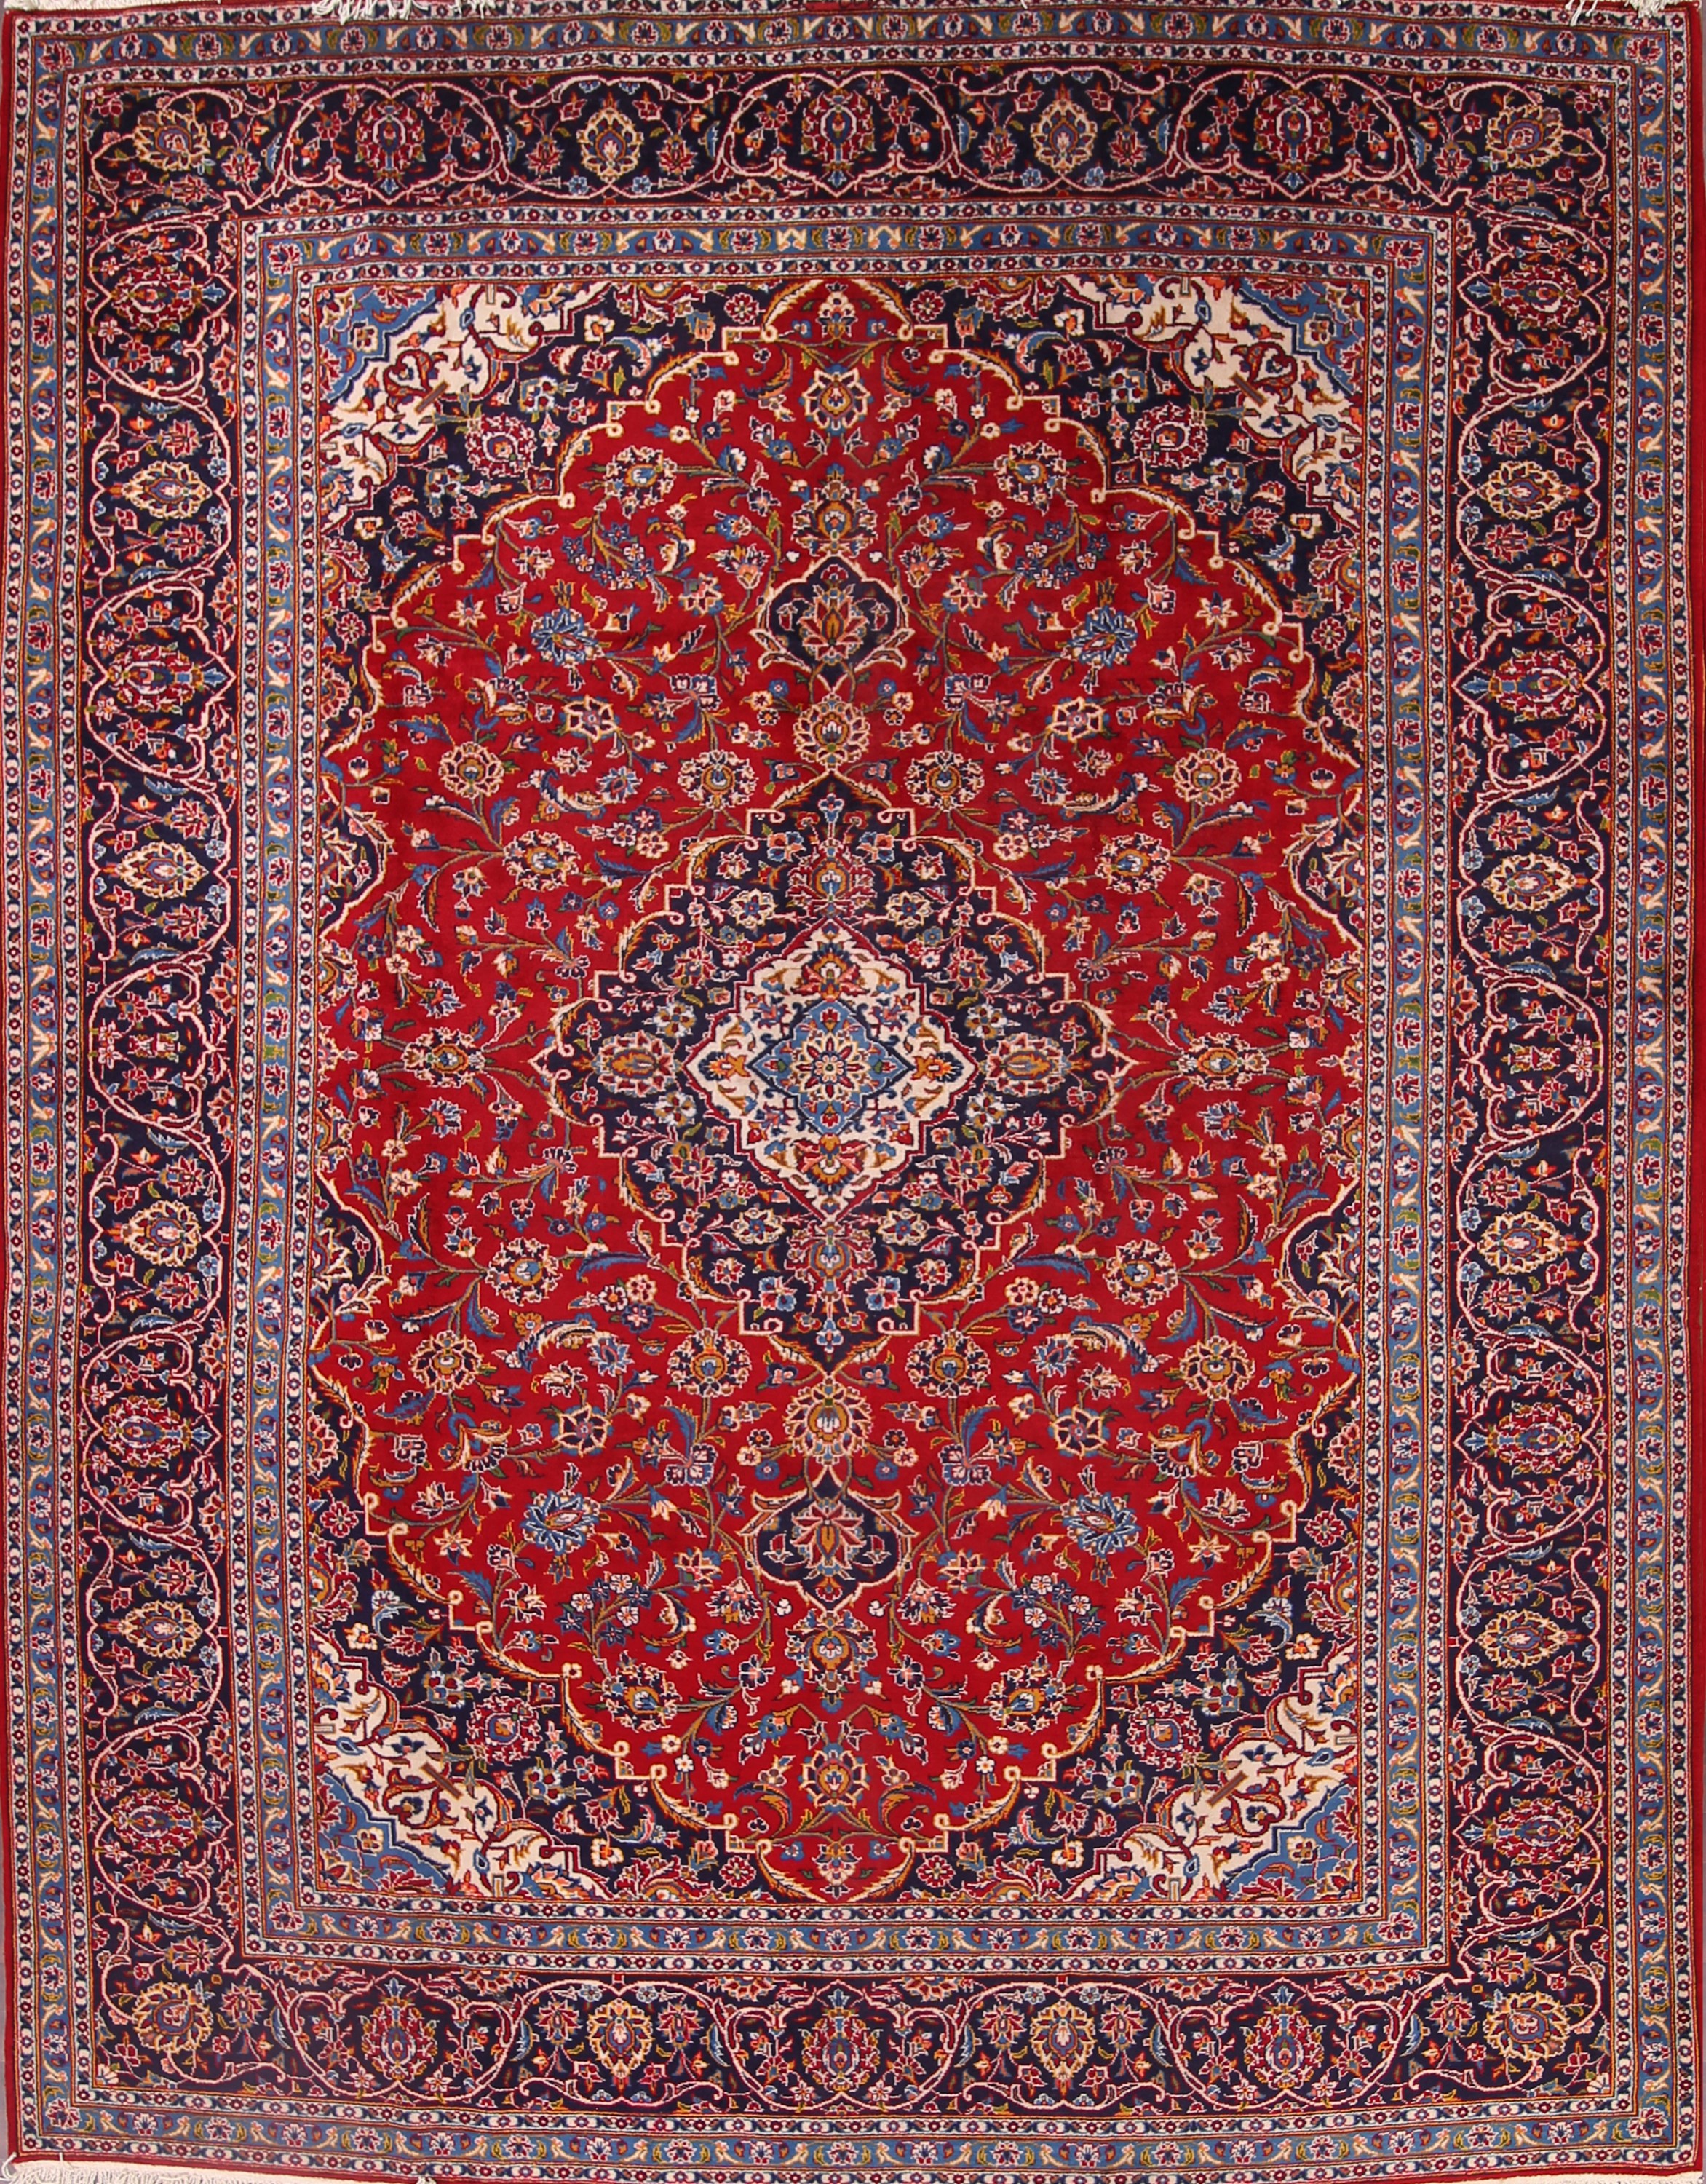 Persian area rugs traditional floral red 9x12 kashan persian area rug PFICCJB